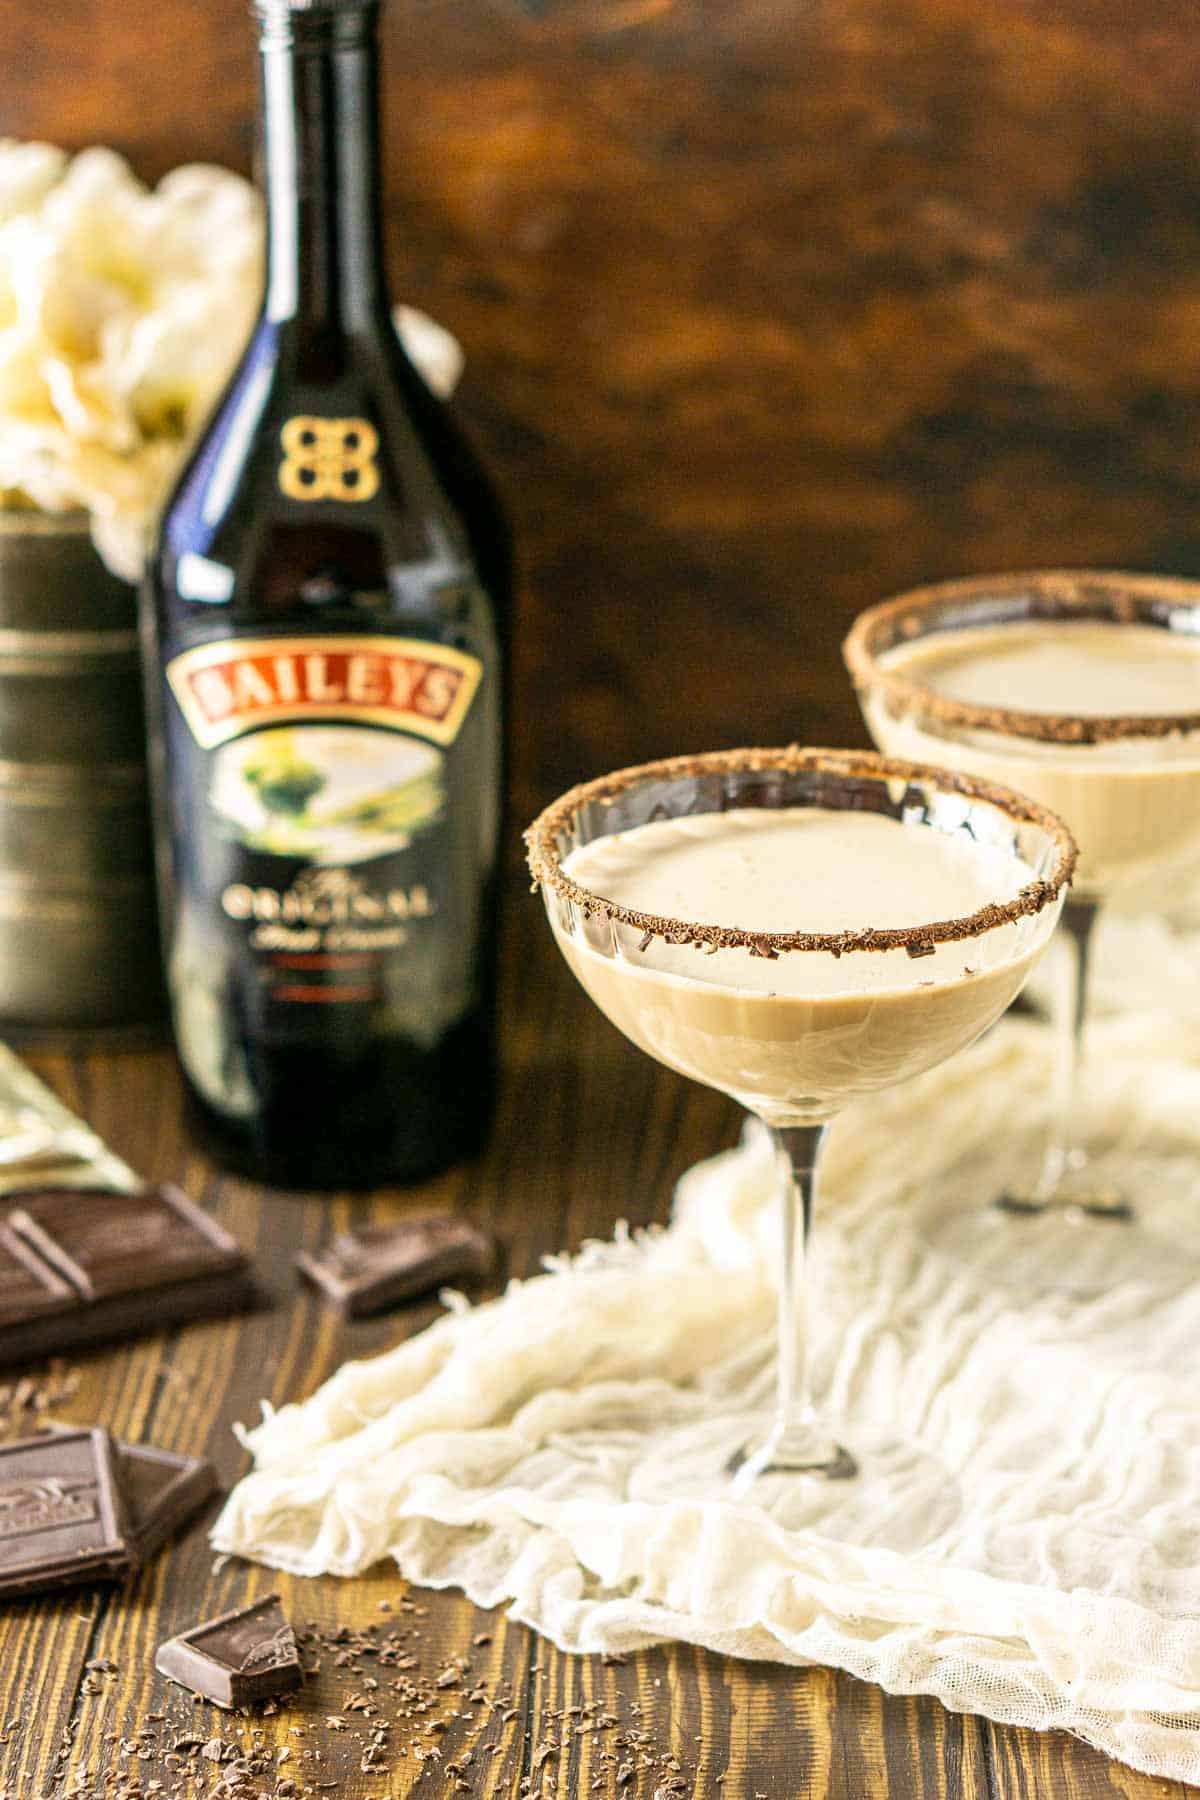 Two Baileys chocolate martinis with a bottle of Irish cream and chopped chocolate to the side.